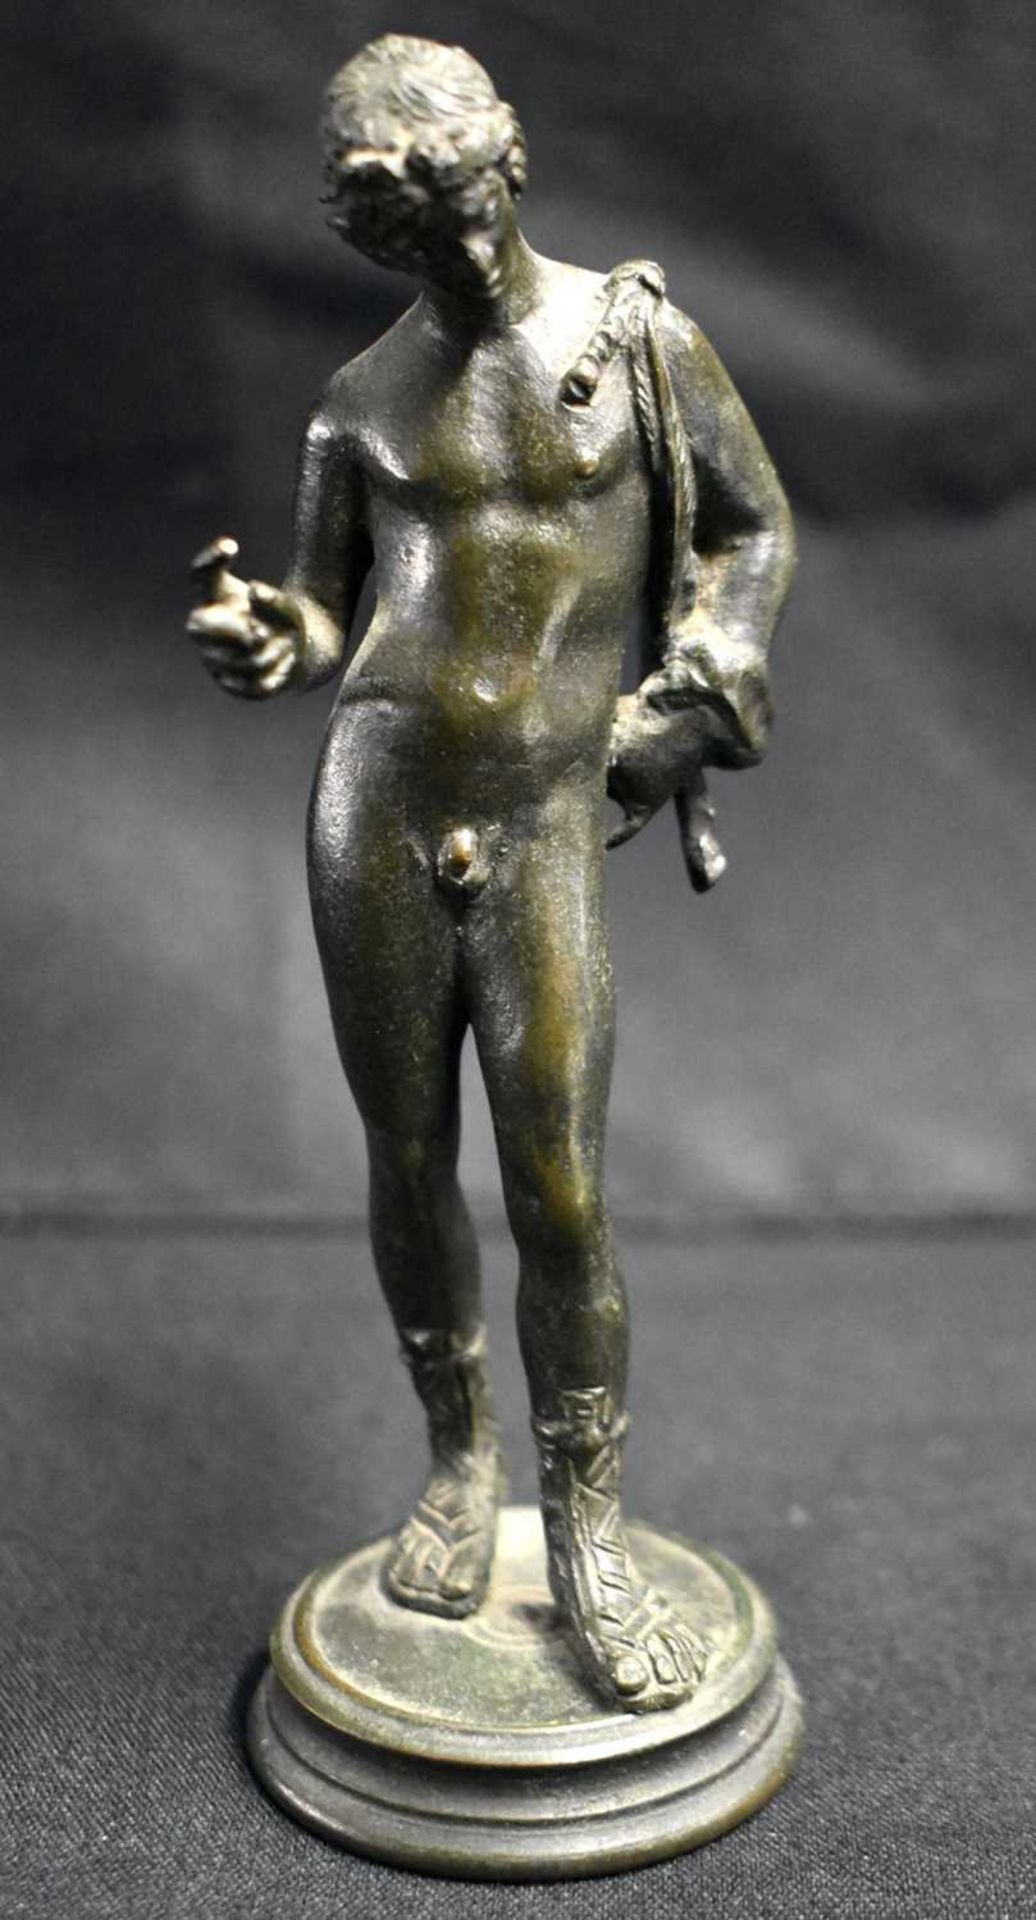 A 19TH CENTURY ITALIAN GRAND TOUR BRONZE FIGURE OF NARCISSUS After the Antiquity. 13 cm high.